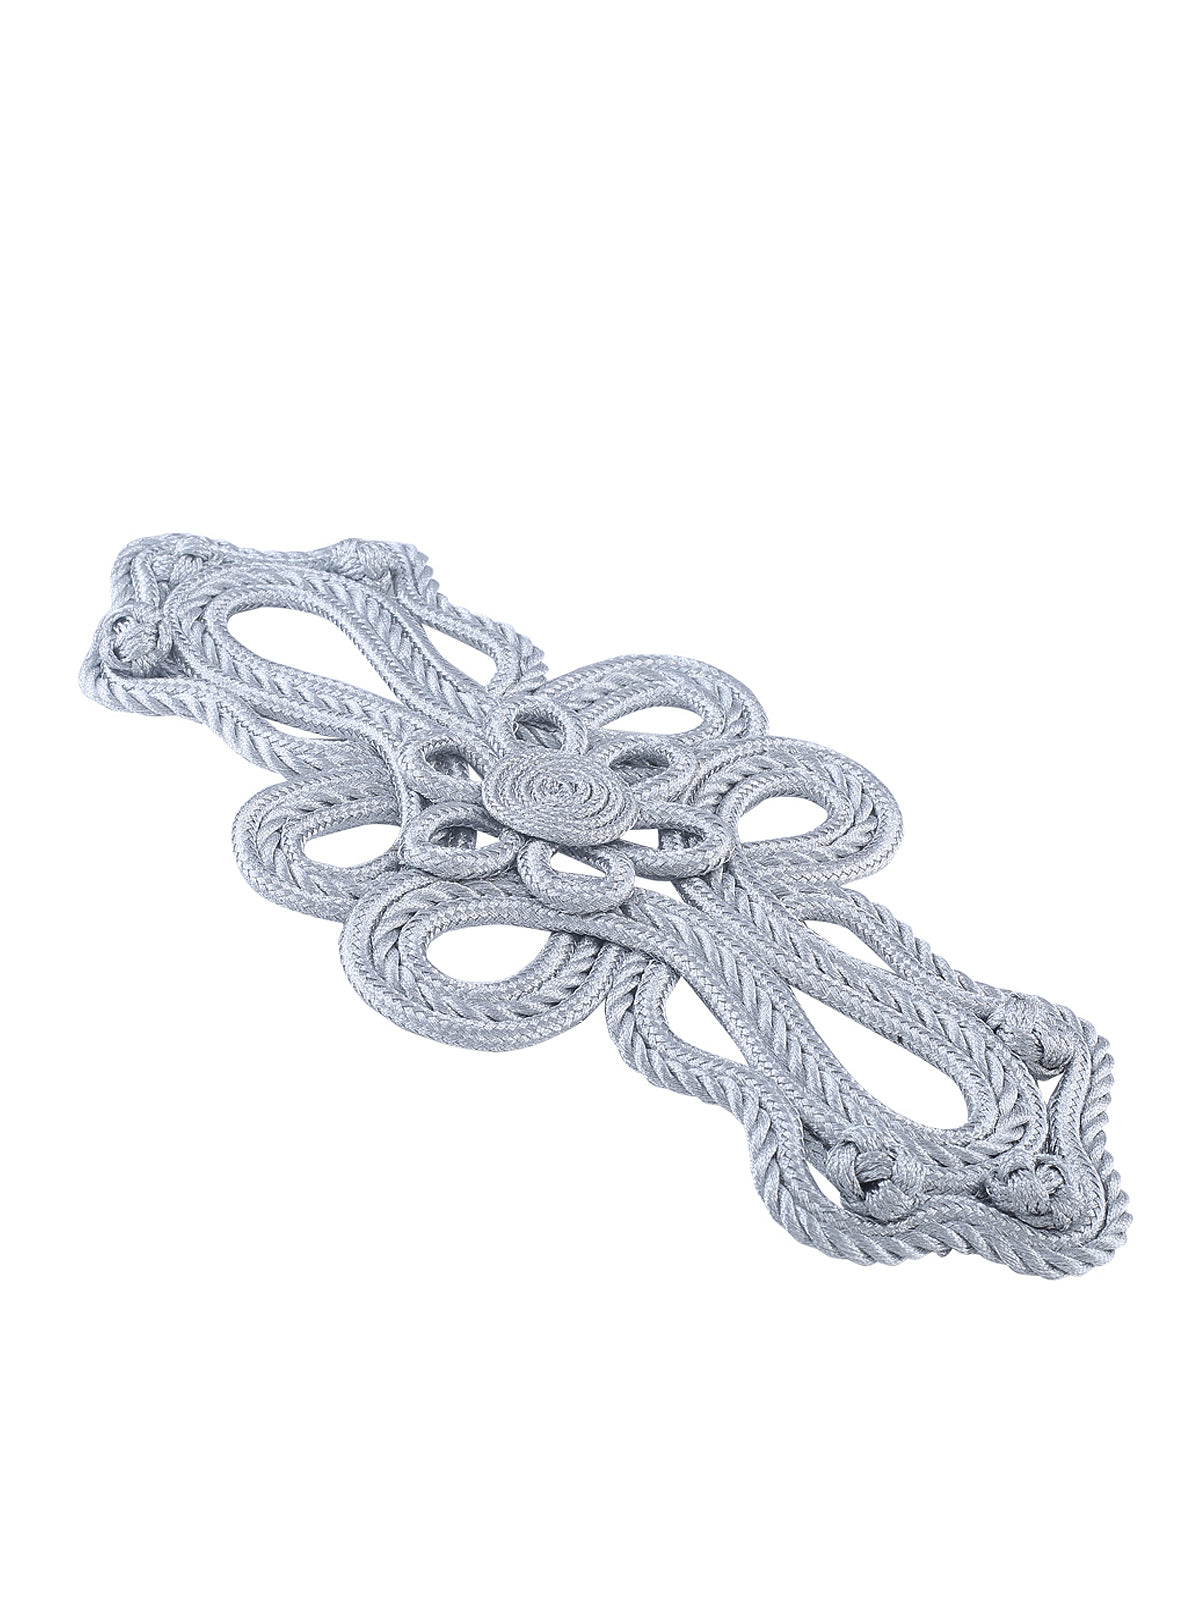 Braided Cord Shiny Metallic Silver Patch